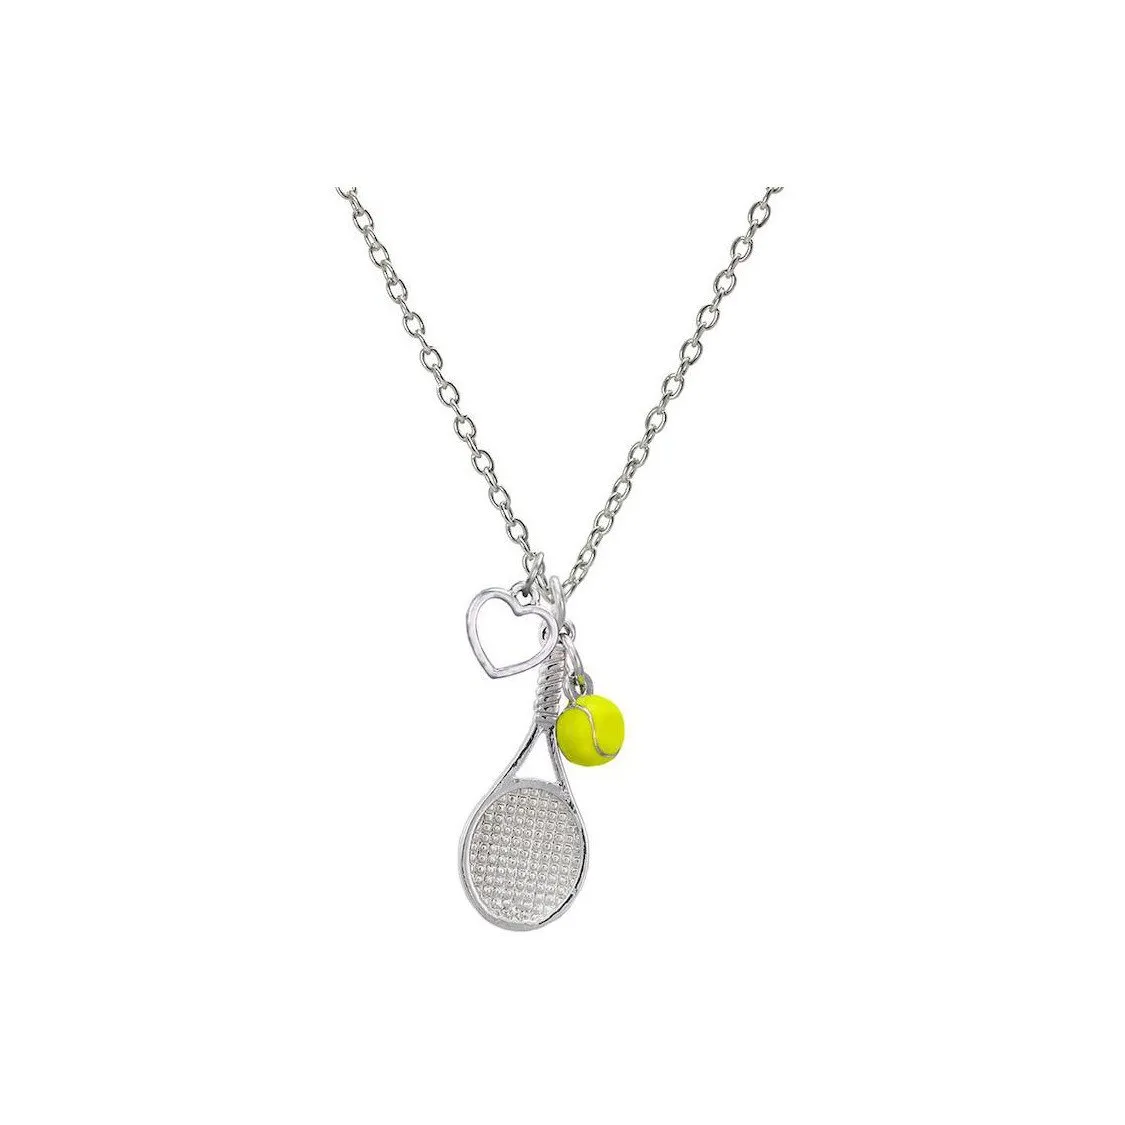 Tennis jewelry consisting of tennis necklace with racket, heart & tennis ball